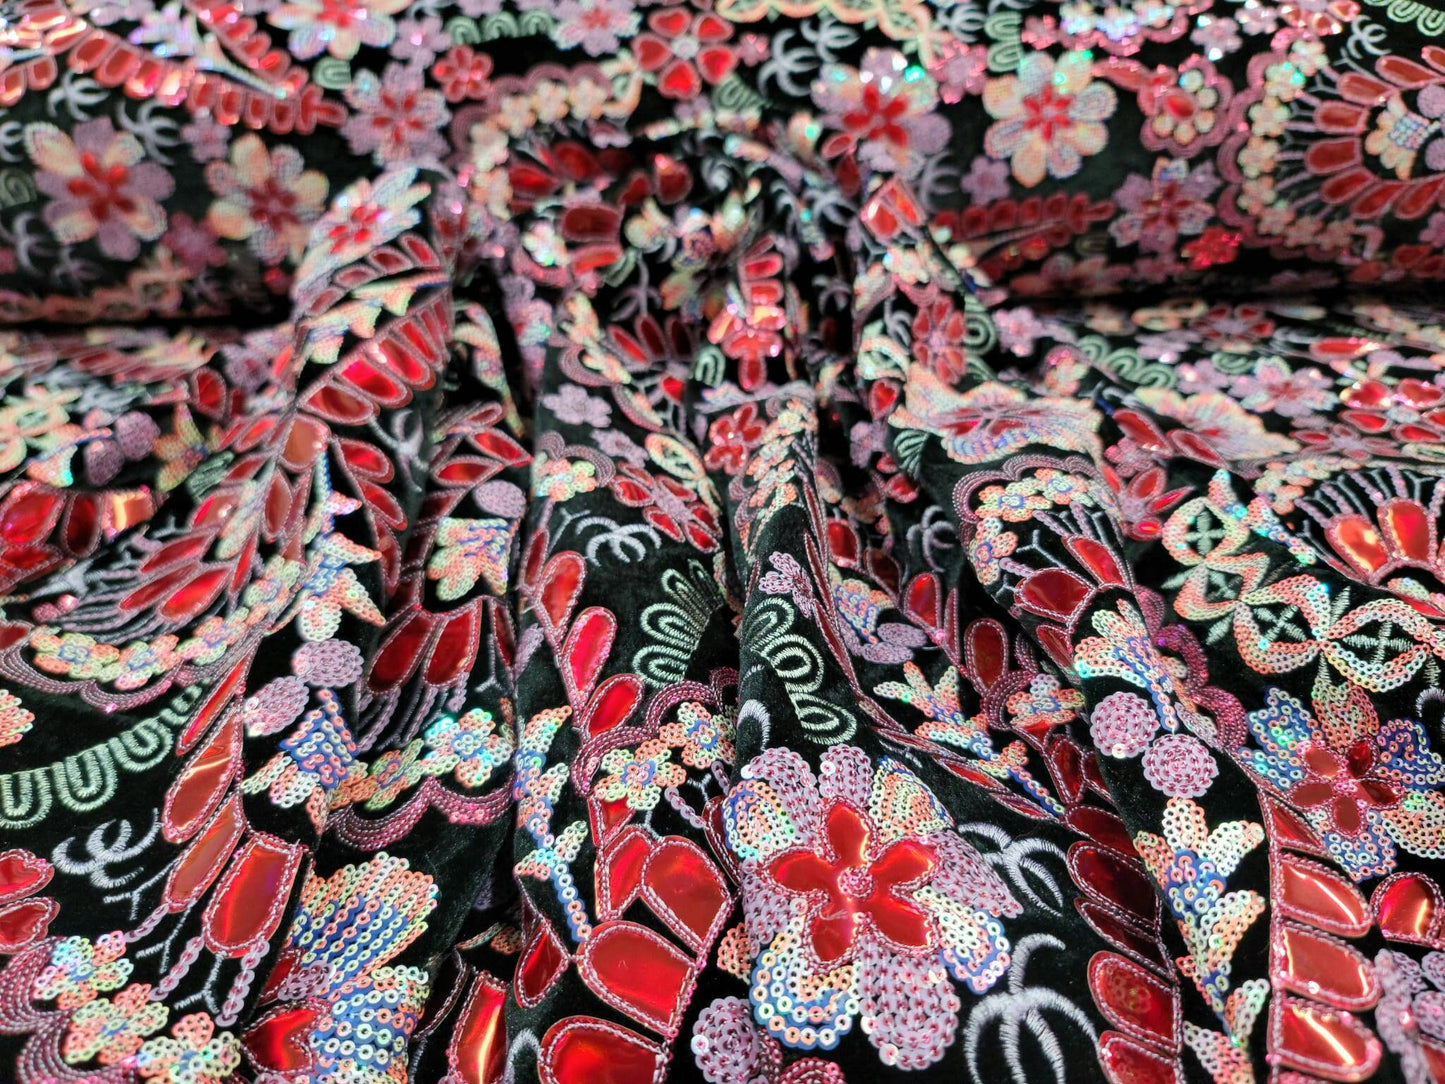 Black Stretch Black Velvet Red Iridescent Sequin Hologram Embroidery Floral Flowers Fabric Sold by the Yard Gown Prom Bridal Evening Dress